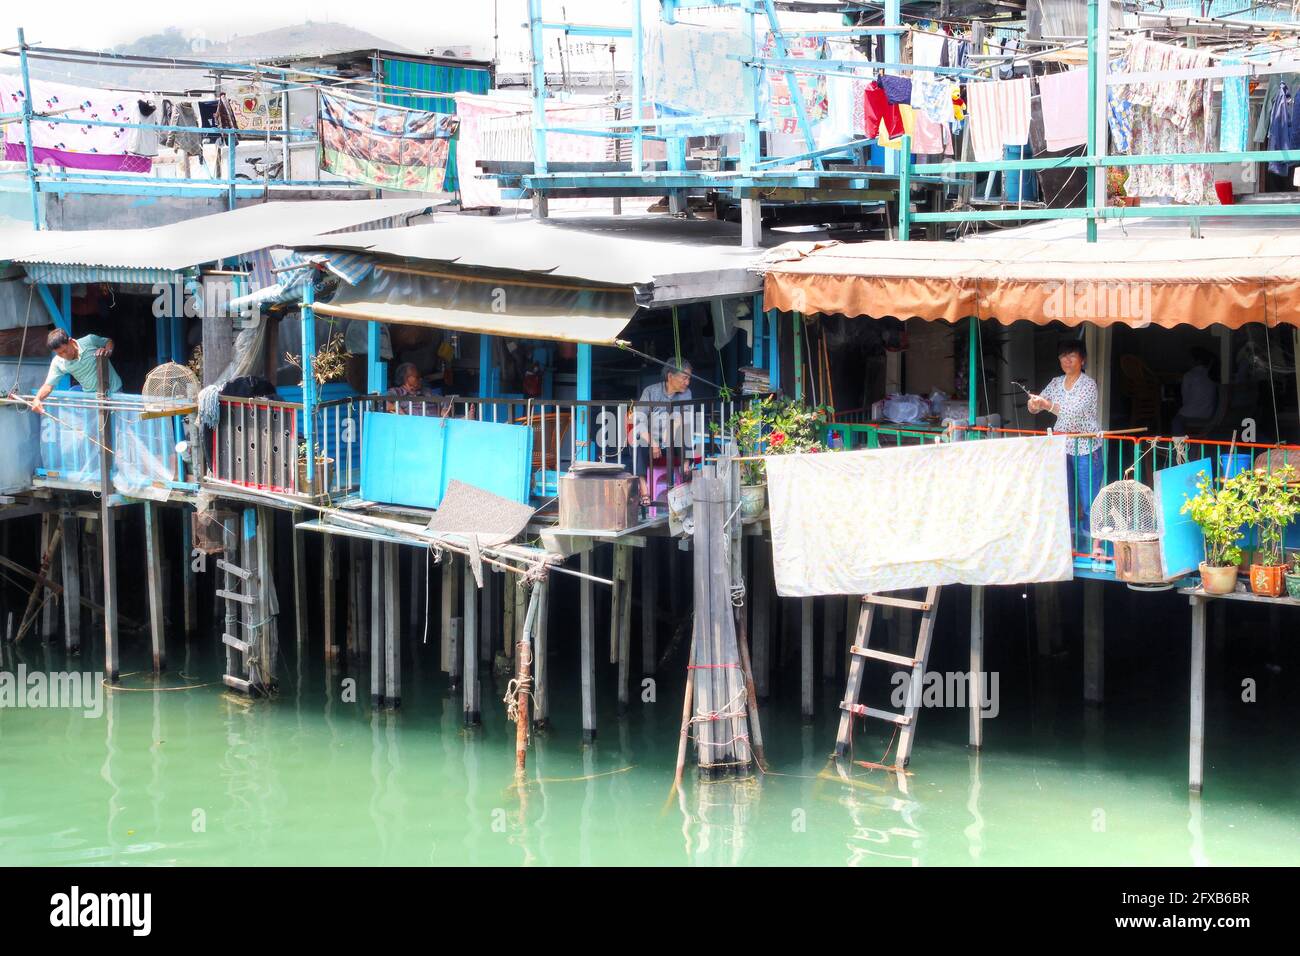 HONG KONG-Apr. 10, 2011: Residents of Tai O fishing from their houses on stilts above the tidal flats of Lantau Island in Hong Kong. Home to the Tanka Stock Photo